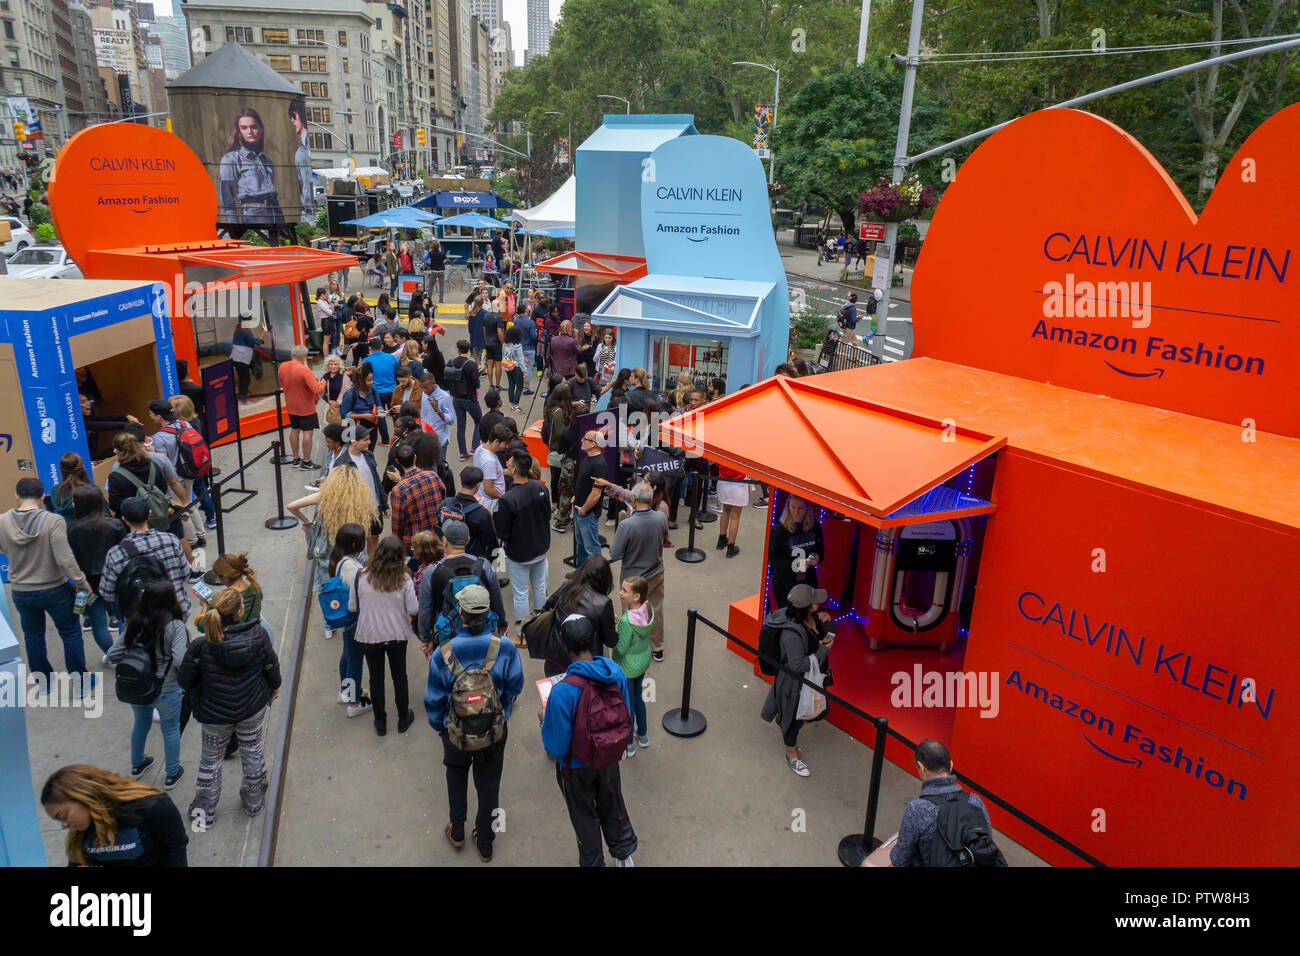 Hundreds of visitors flock to the Calvin Klein X Amazon Fashion  collaboration branding event in Flatiron Plaza in New York on Saturday,  October 6, 2018. Visitors were treated to a number of "